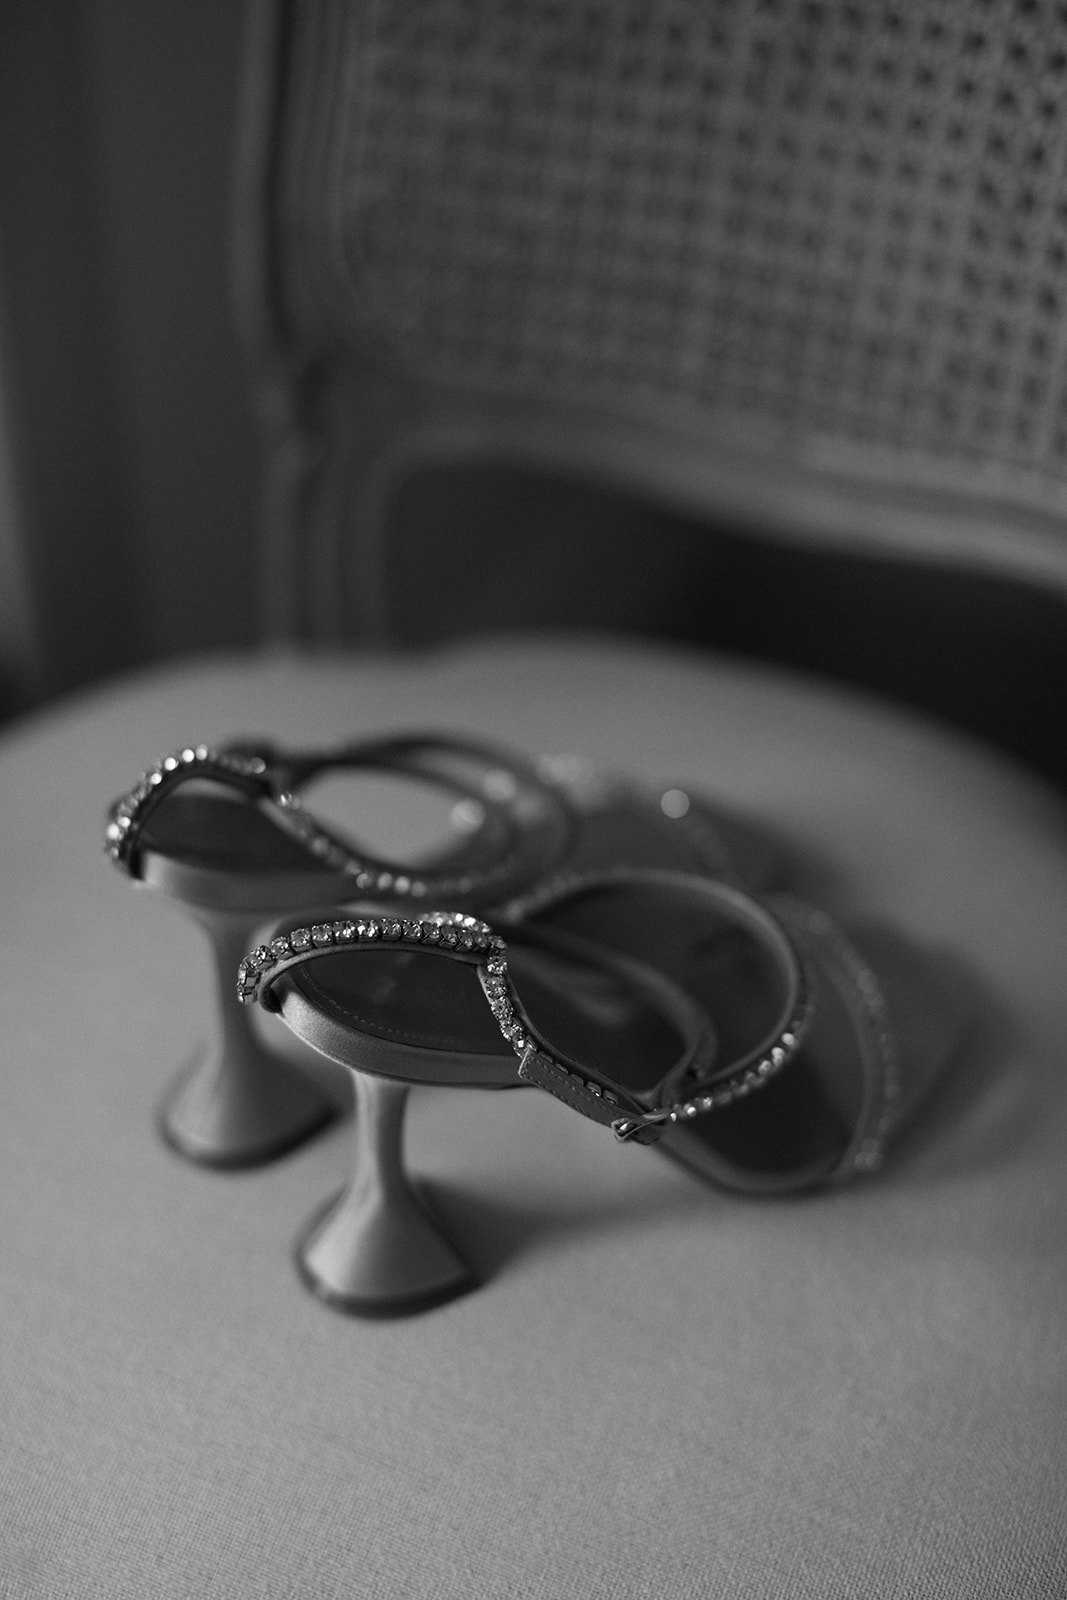 Brides shoes sitting on chair